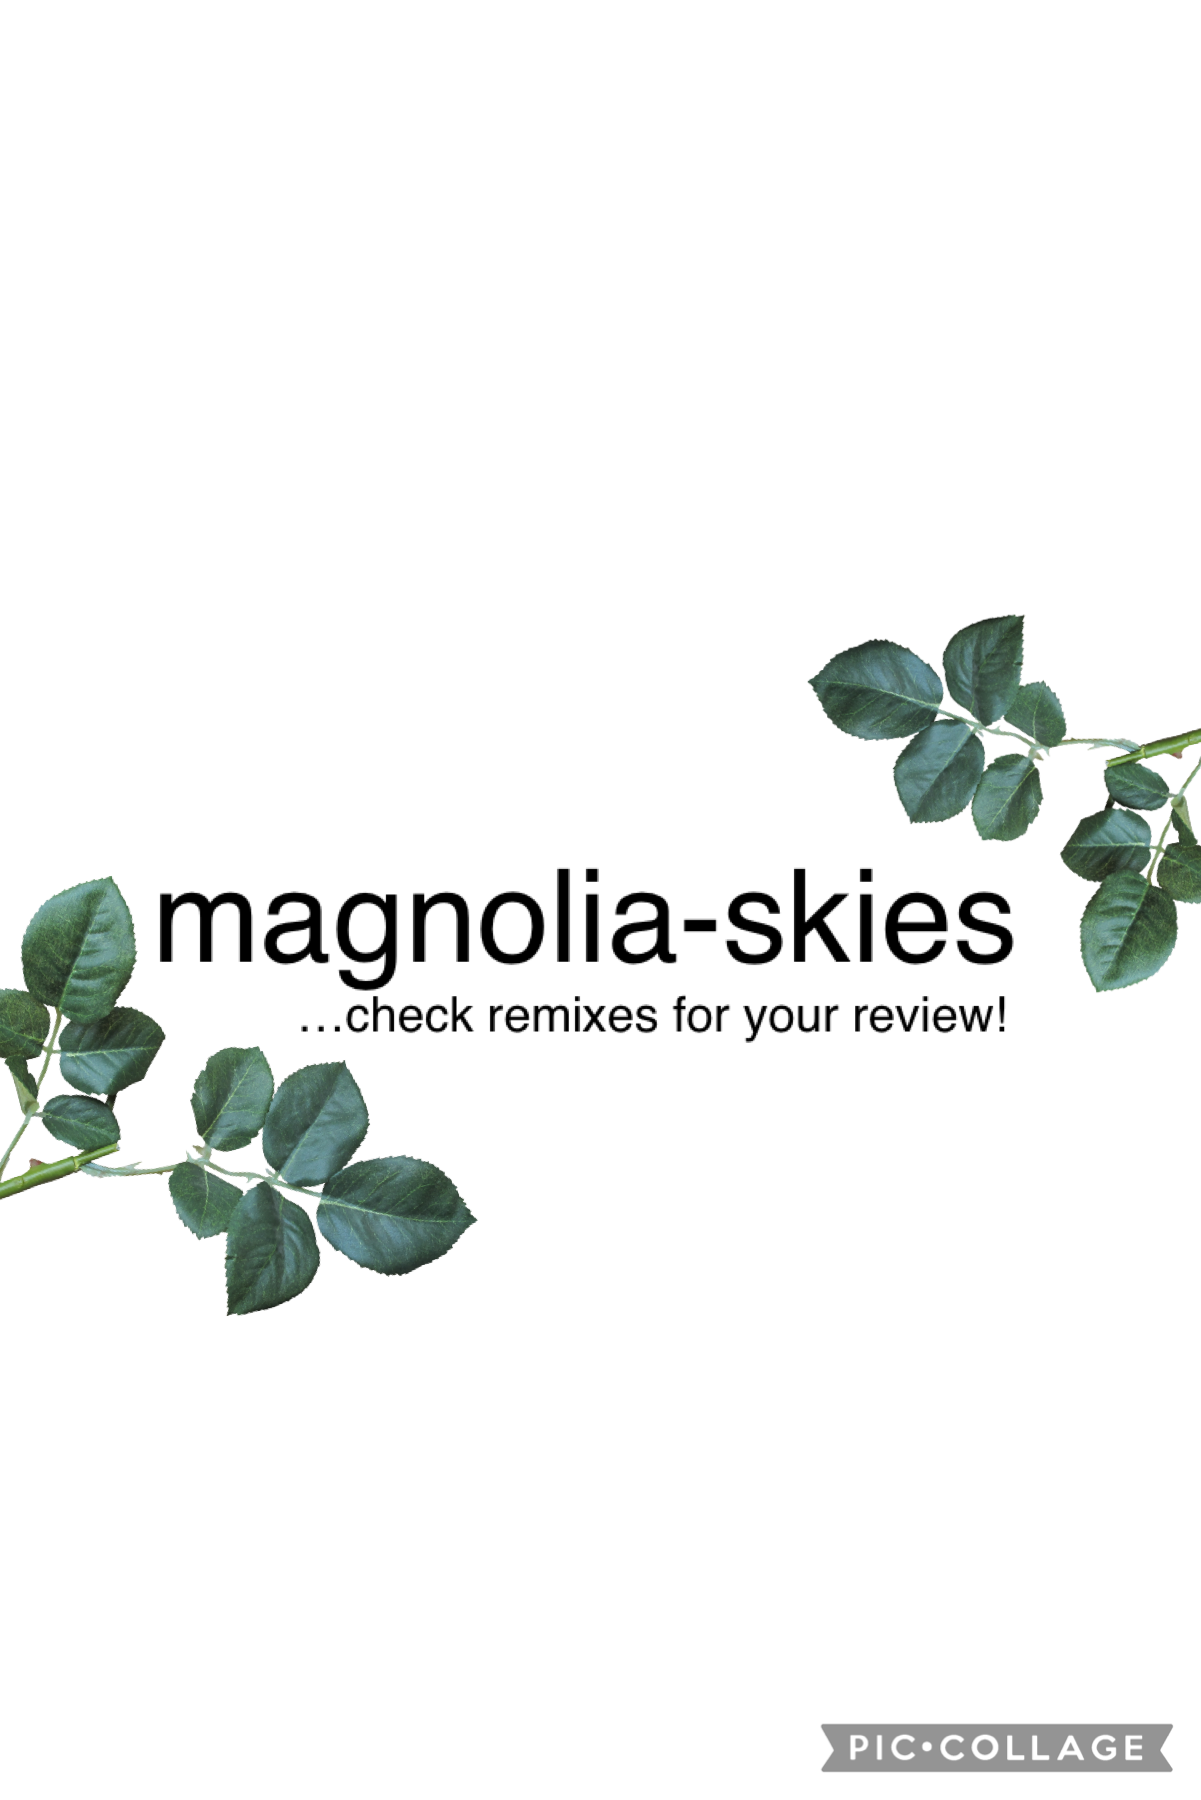 Check remixes for the review!